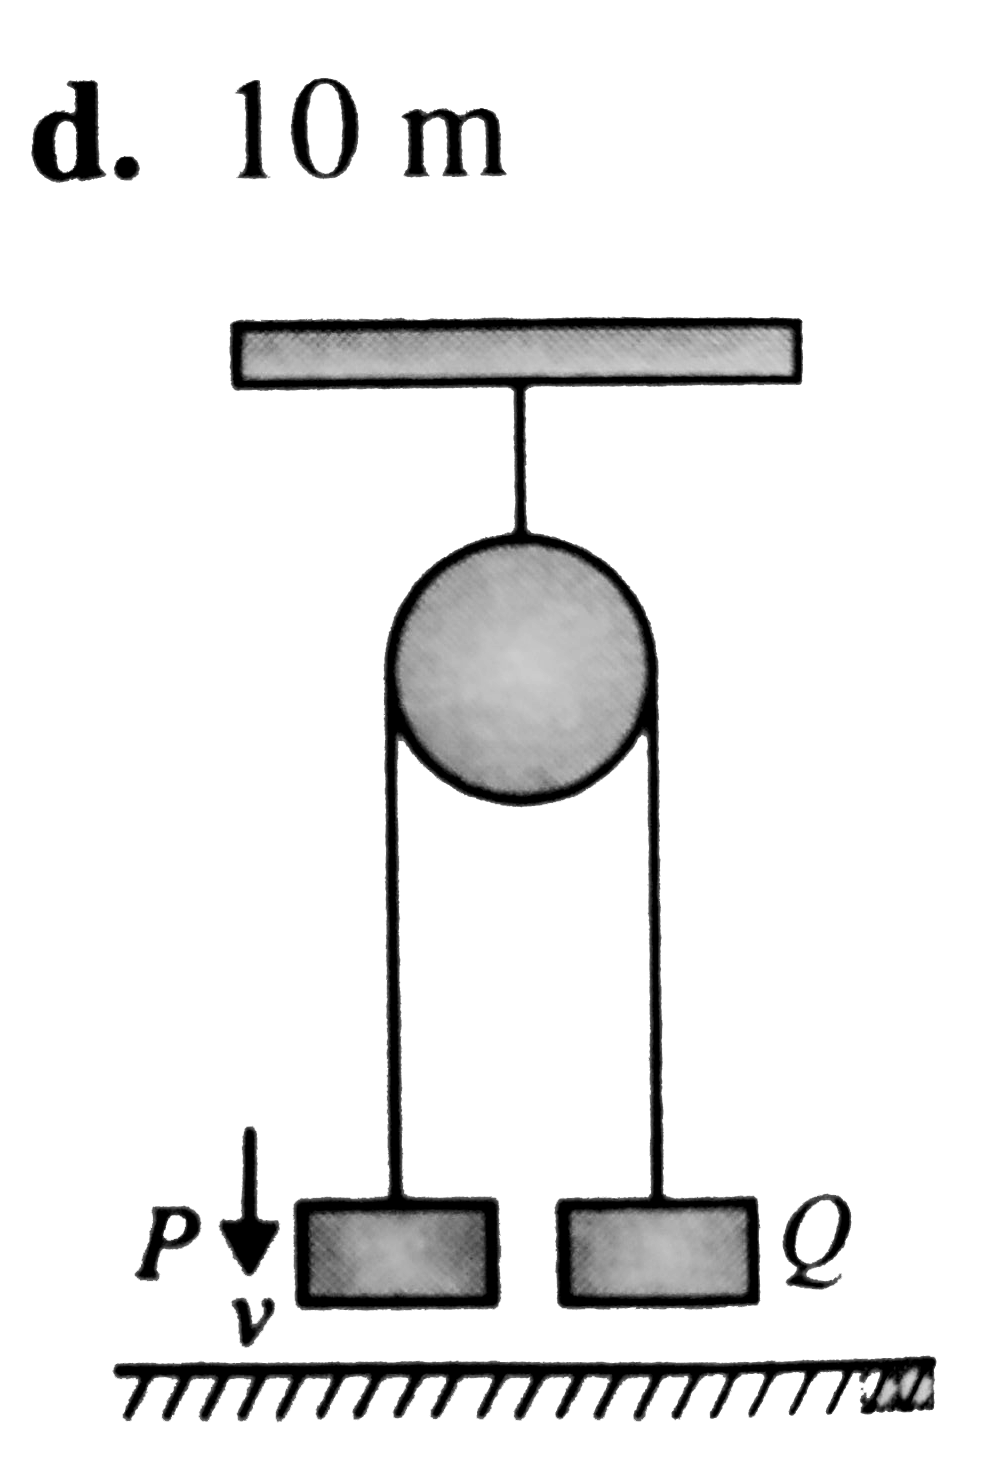 P and Q are two identical masses at rest suspended by an inextensible string passing over a smooth frictionless pulley. Mass P is given a downward push with a speed v as shown in Fig. It collides elastically with the floor and rebounds immediately. What happens immediately after collision?